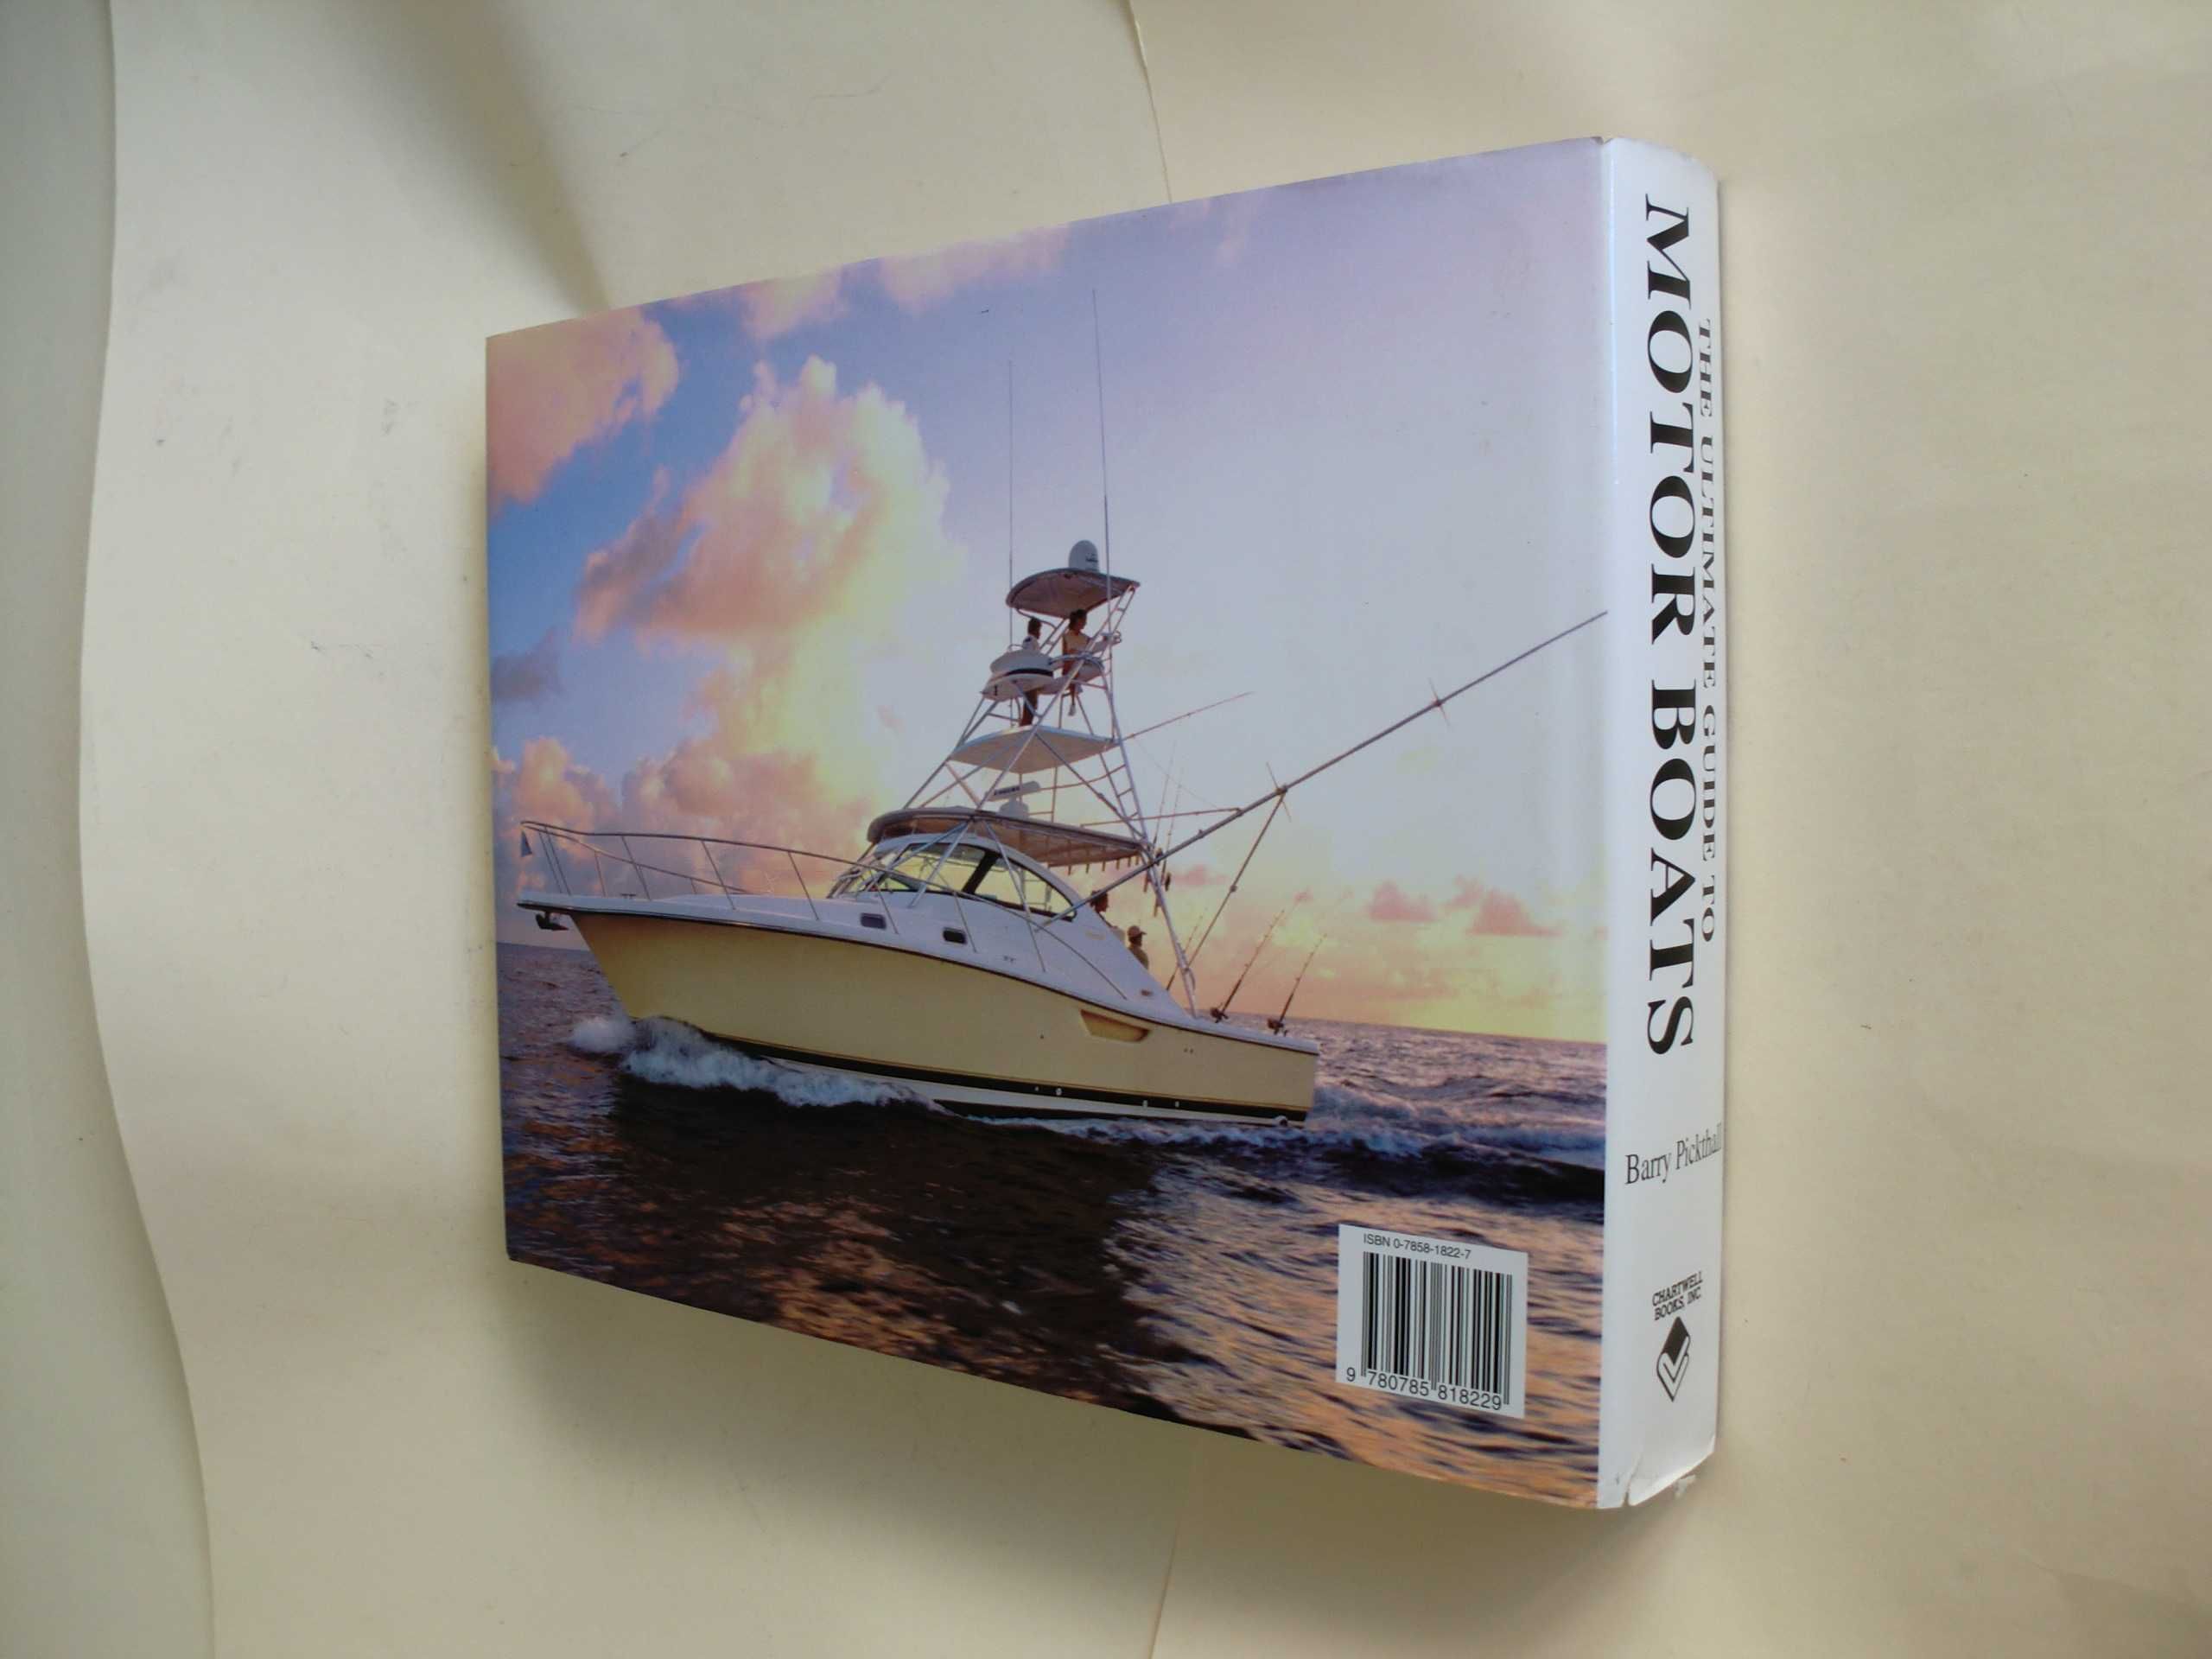 The Ultimate Guide to Motor Boats
by Barry Pickthall